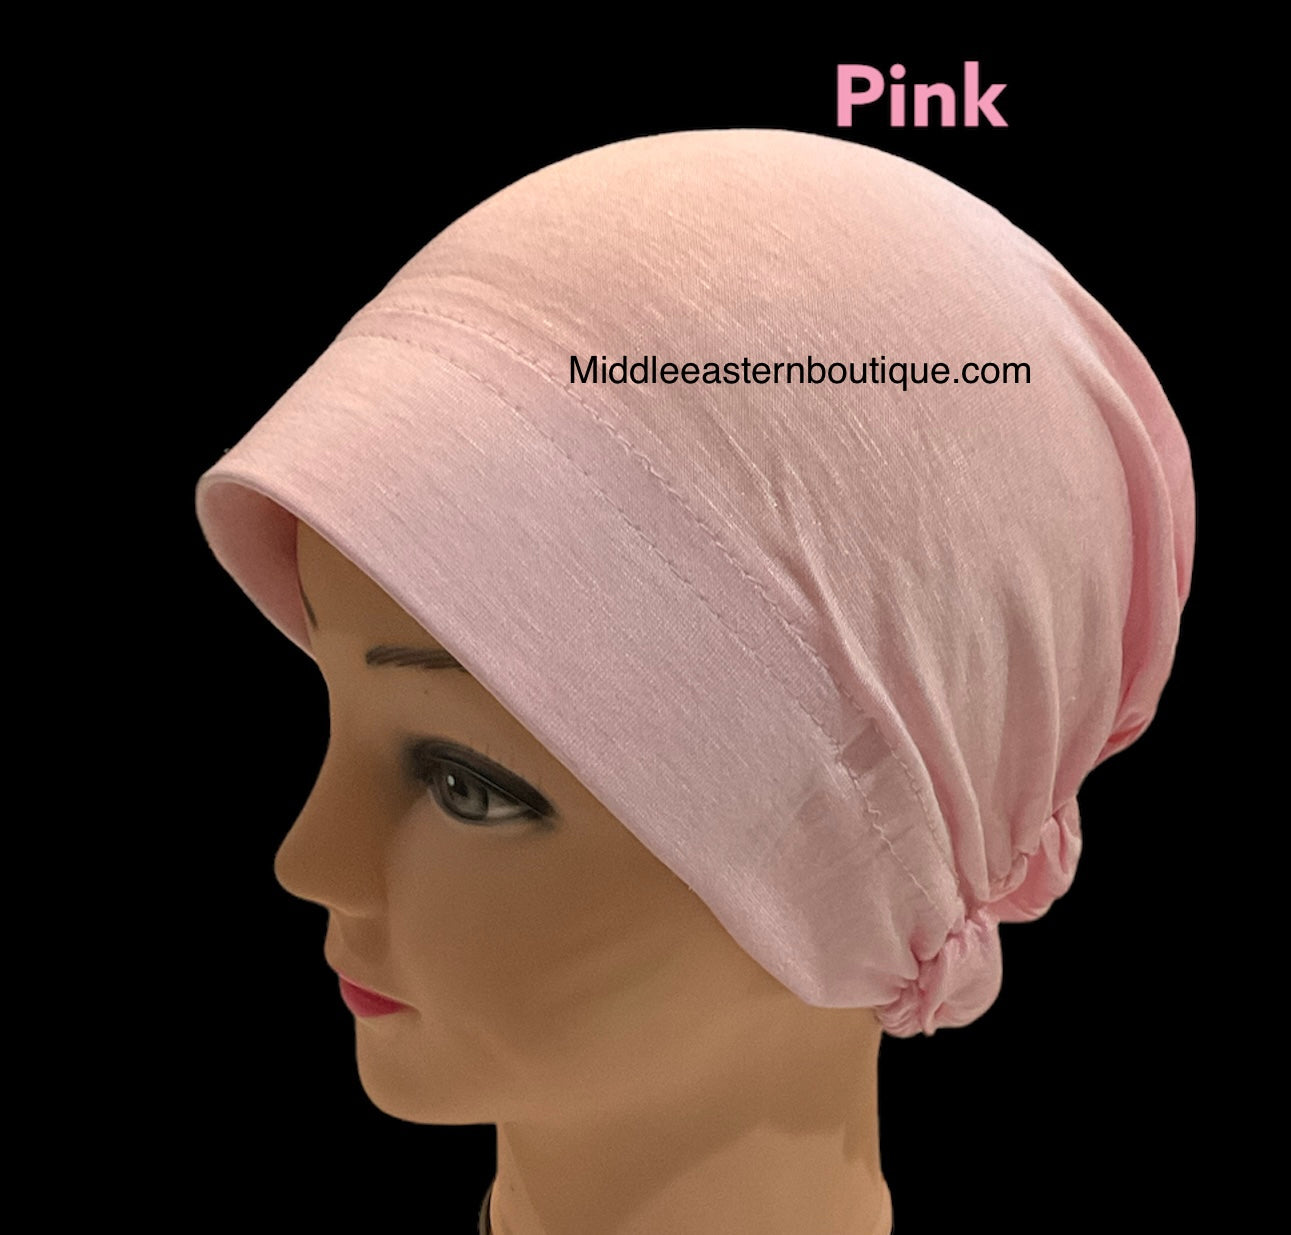 Turban Padded Under Scarf Cap / Full Bonnet cover , 100% Cotton, Hard Front Style Middle Eastern Boutique